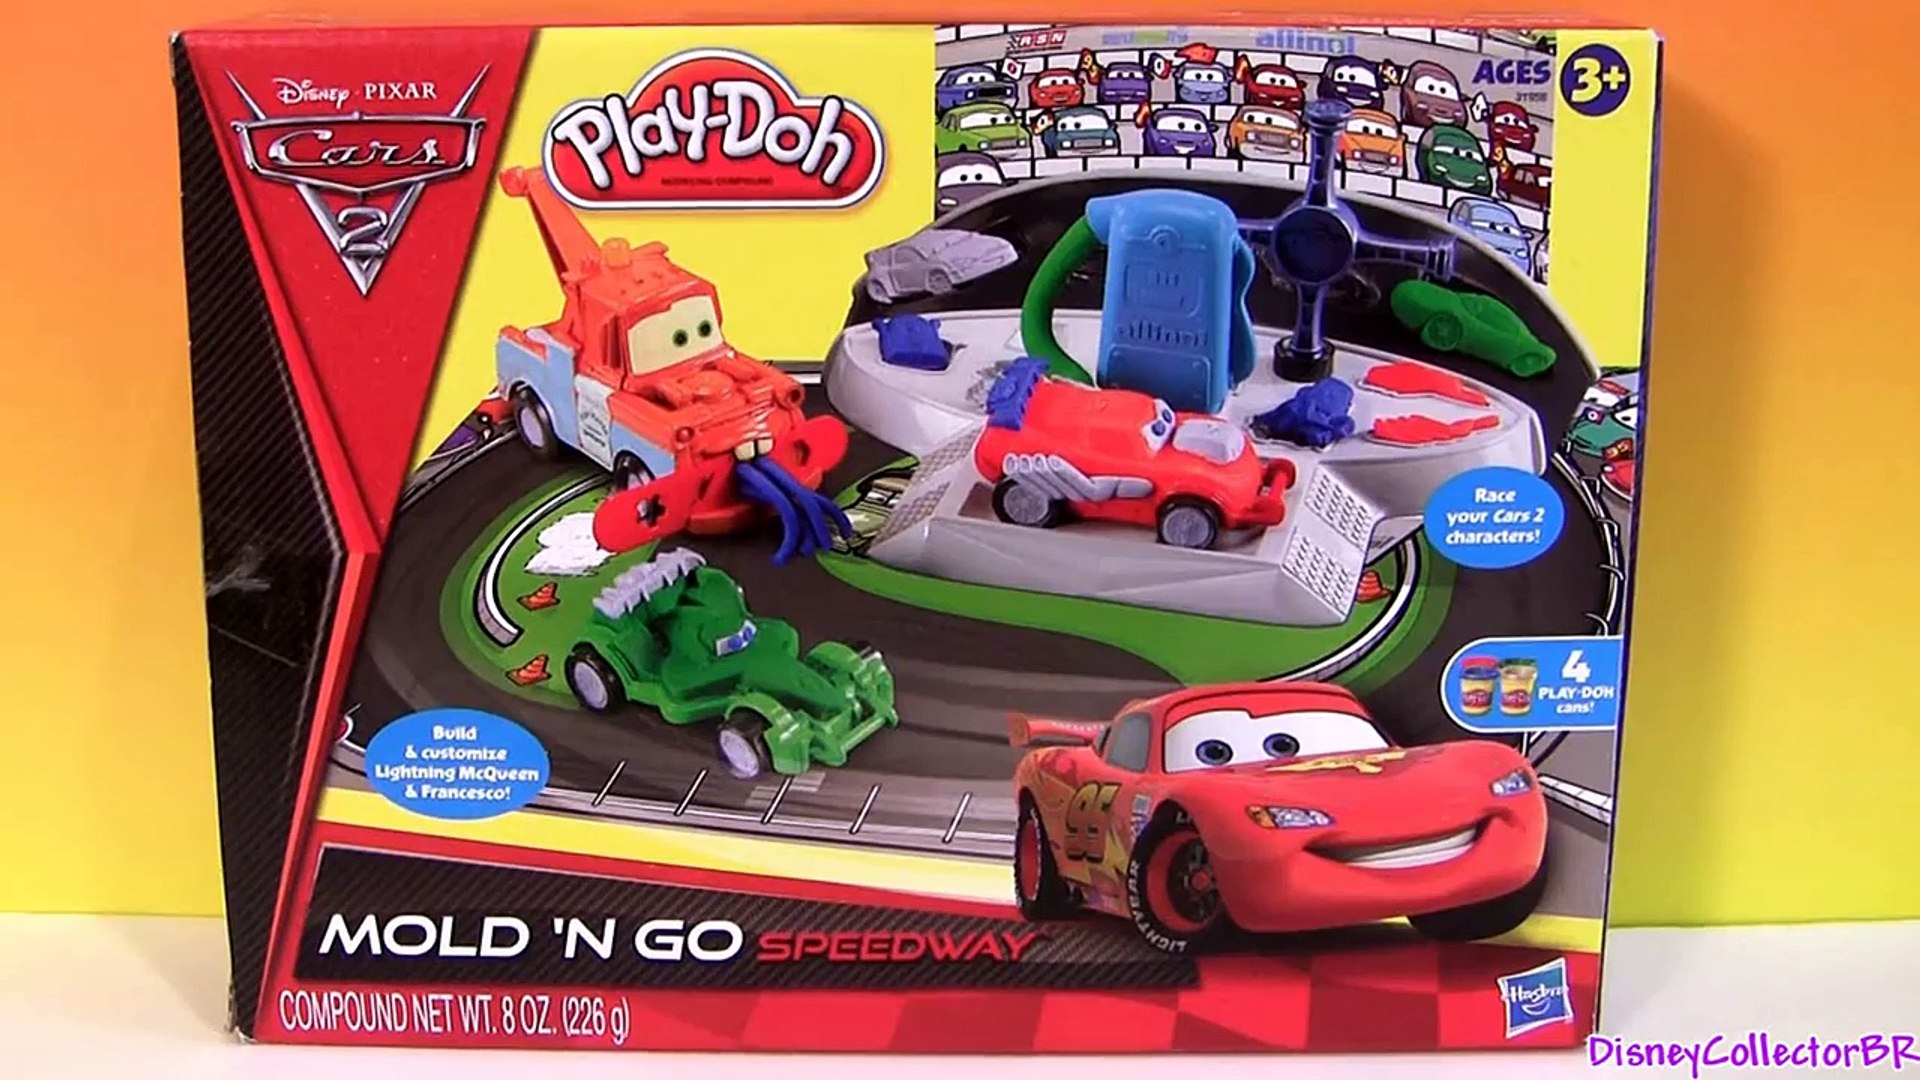 Play-Doh Cars 2 Mold and Go Speedway Playset Disney Pixar Epic Review Mold  Build Car-Toys play doh - Dailymotion Video